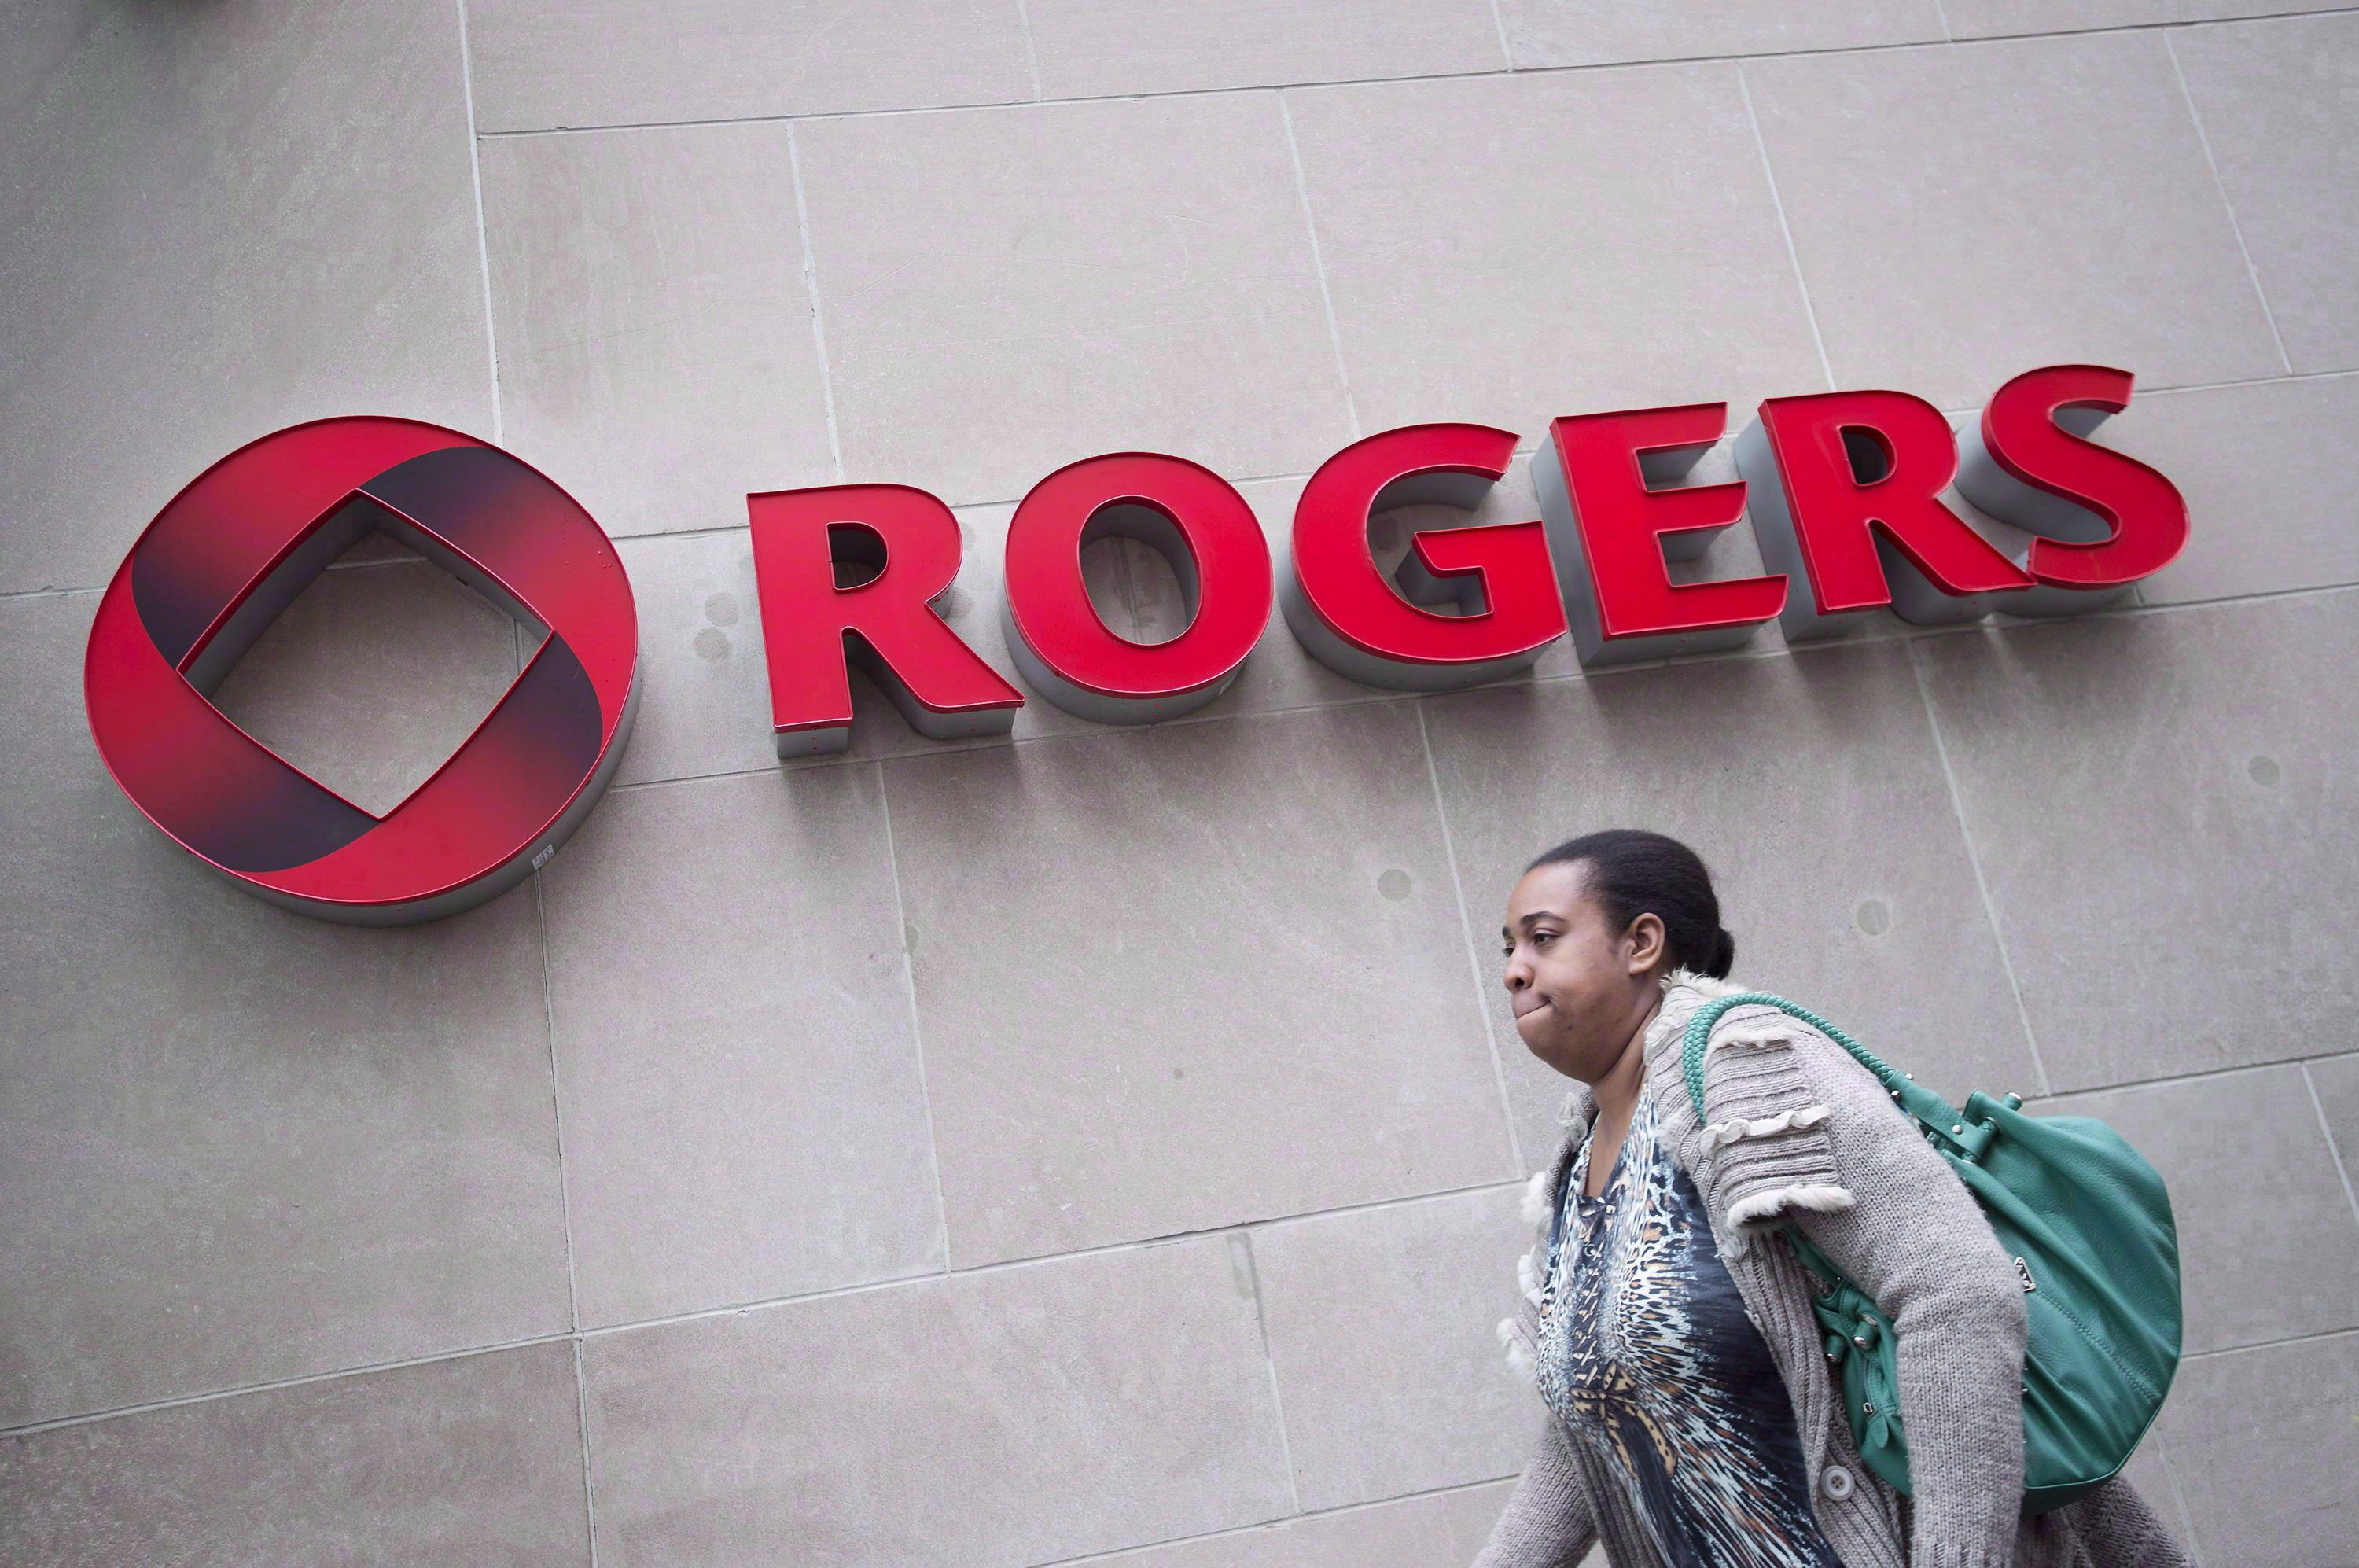 5G technology, its benefits and how to get it - Rogers